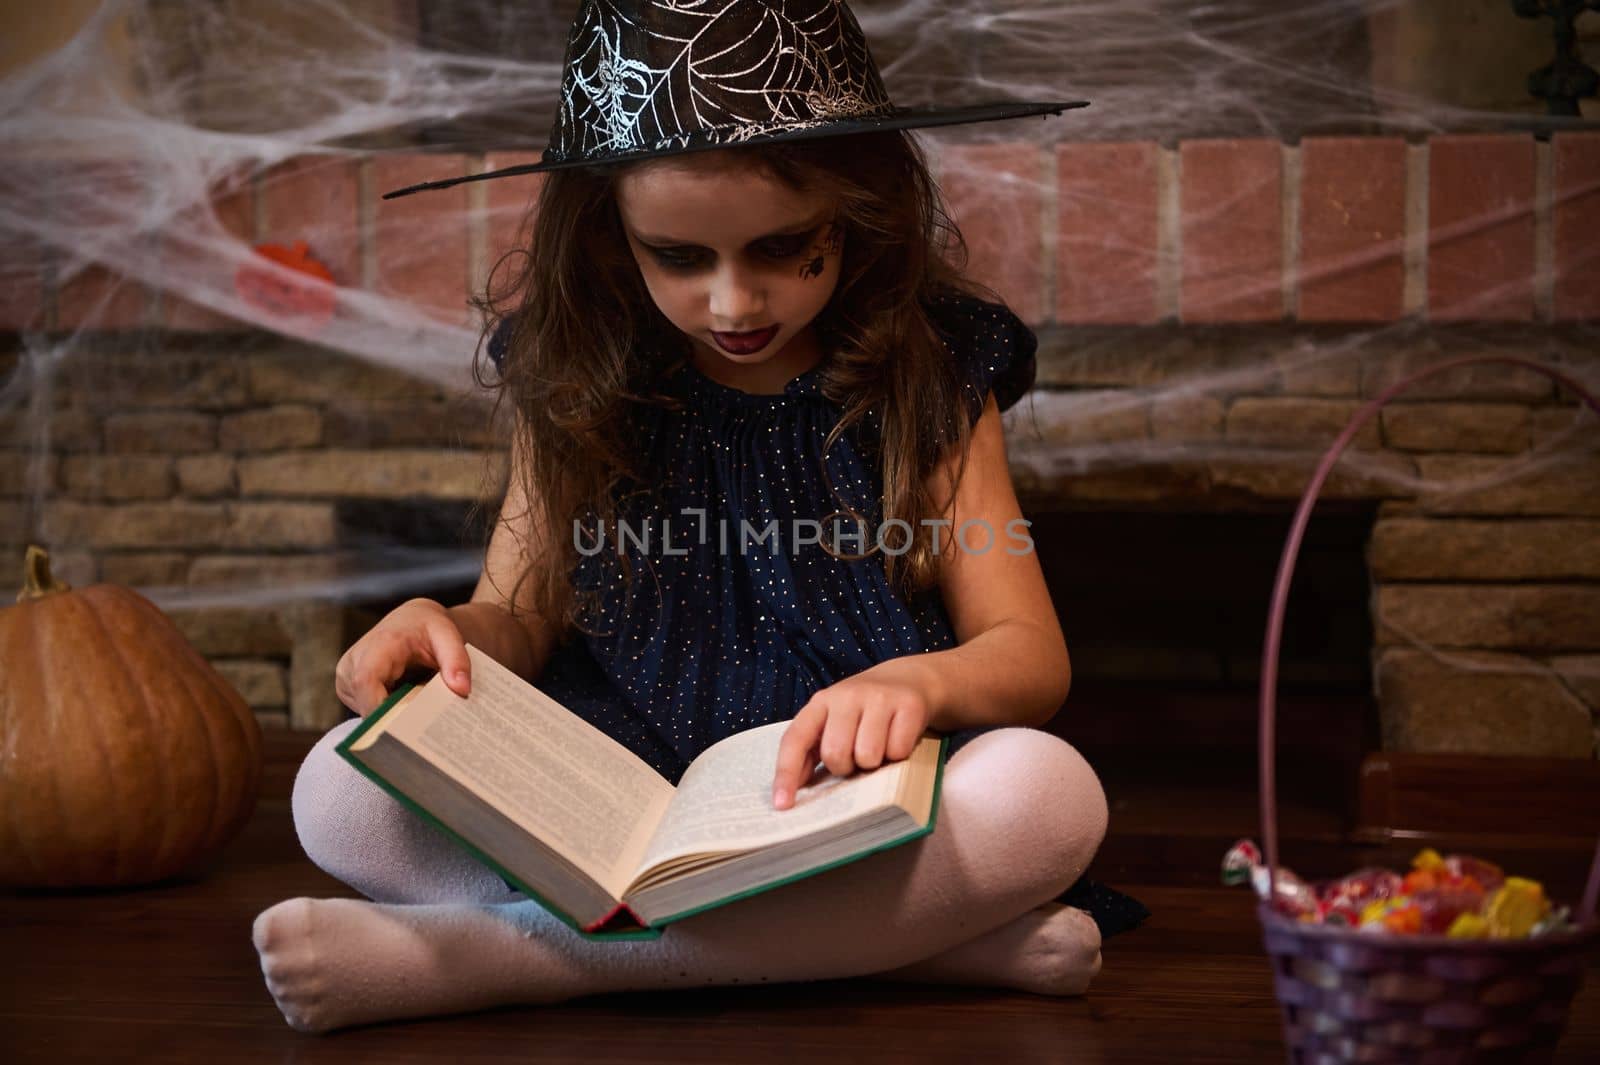 Gothic little girl enchantress in wizard's hat, sitting on the floor surrounded by Halloween treats against a cobweb covered fireplace, casting spells while reading a sorcery book. Halloween party